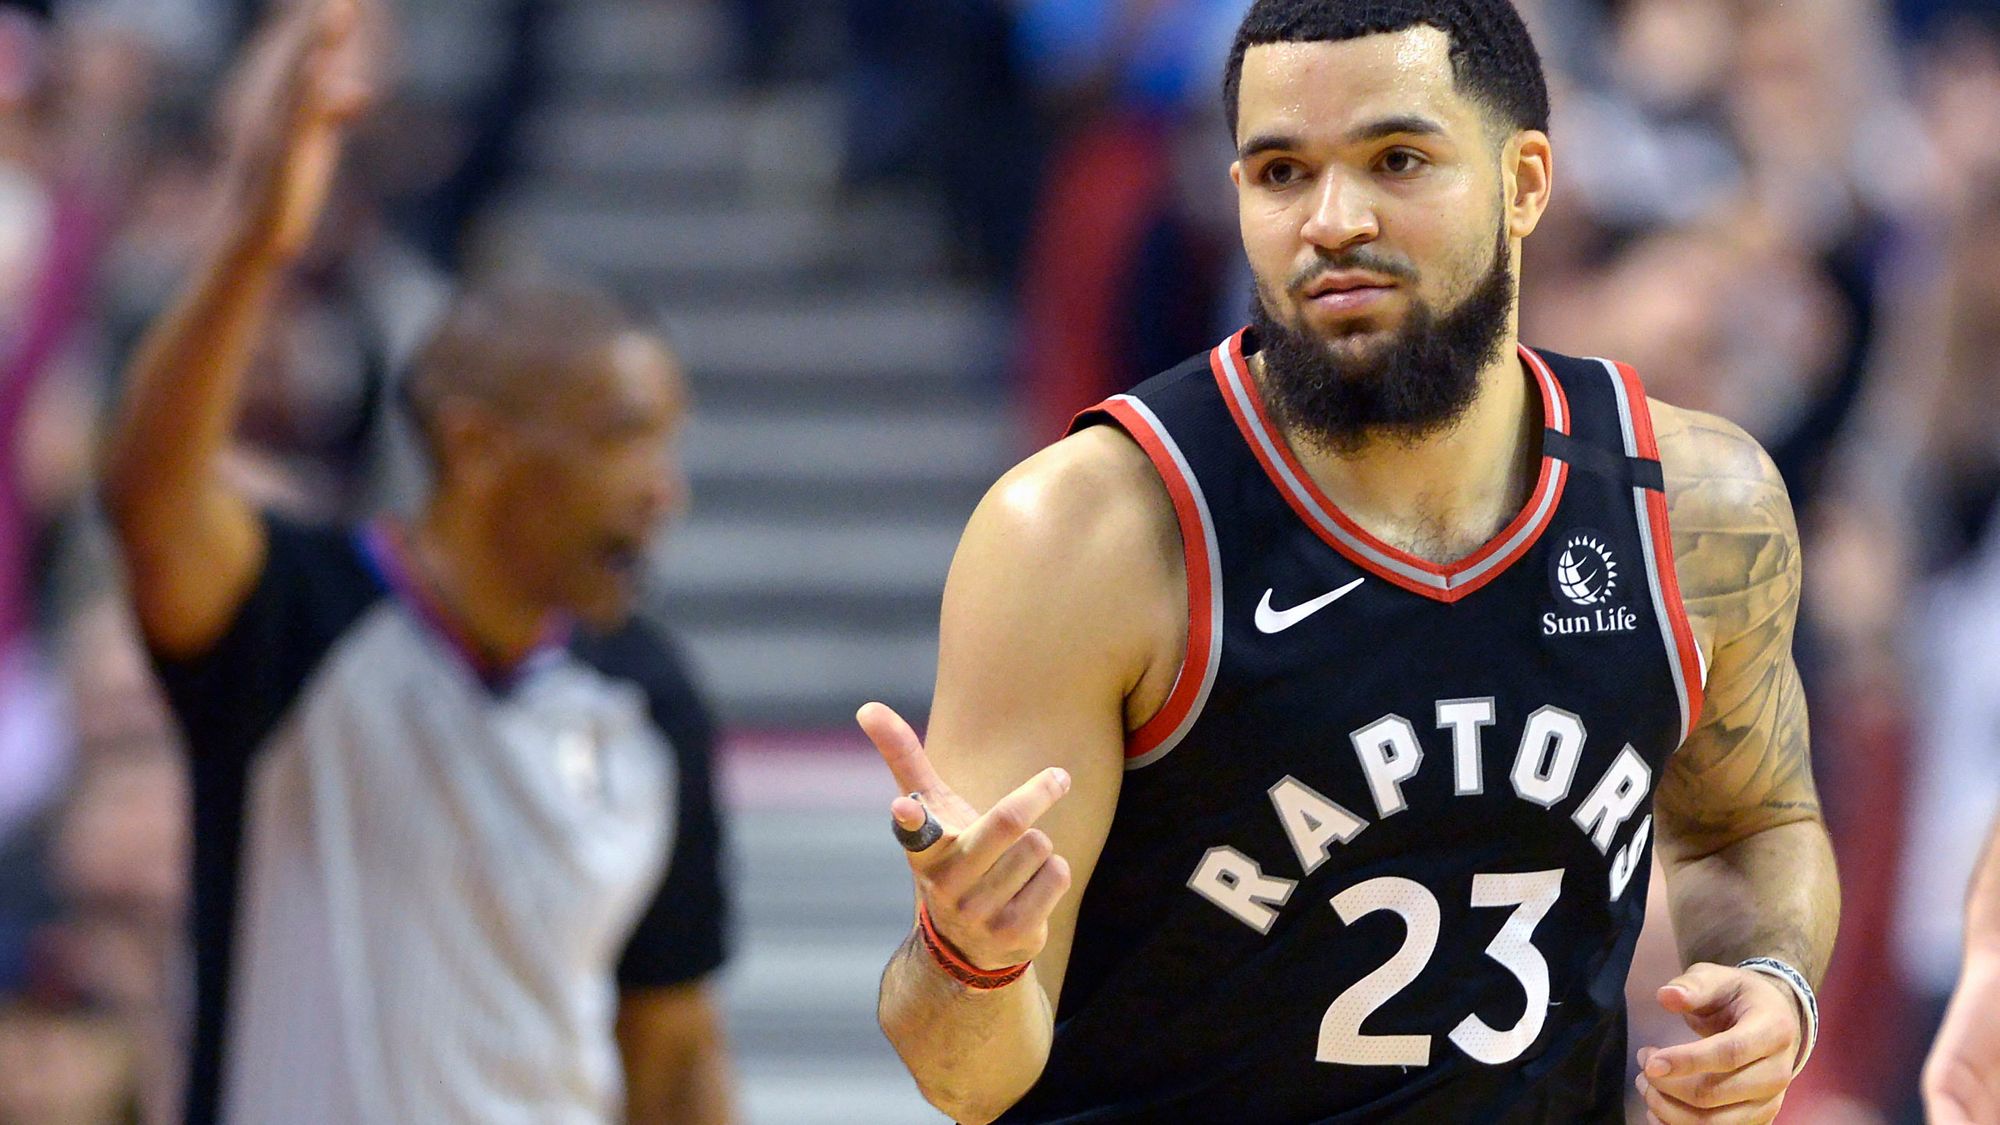 NBA Free Agency Report: Fred VanVleet to Get a Lot of Suitors With Strong Play in the Bubble